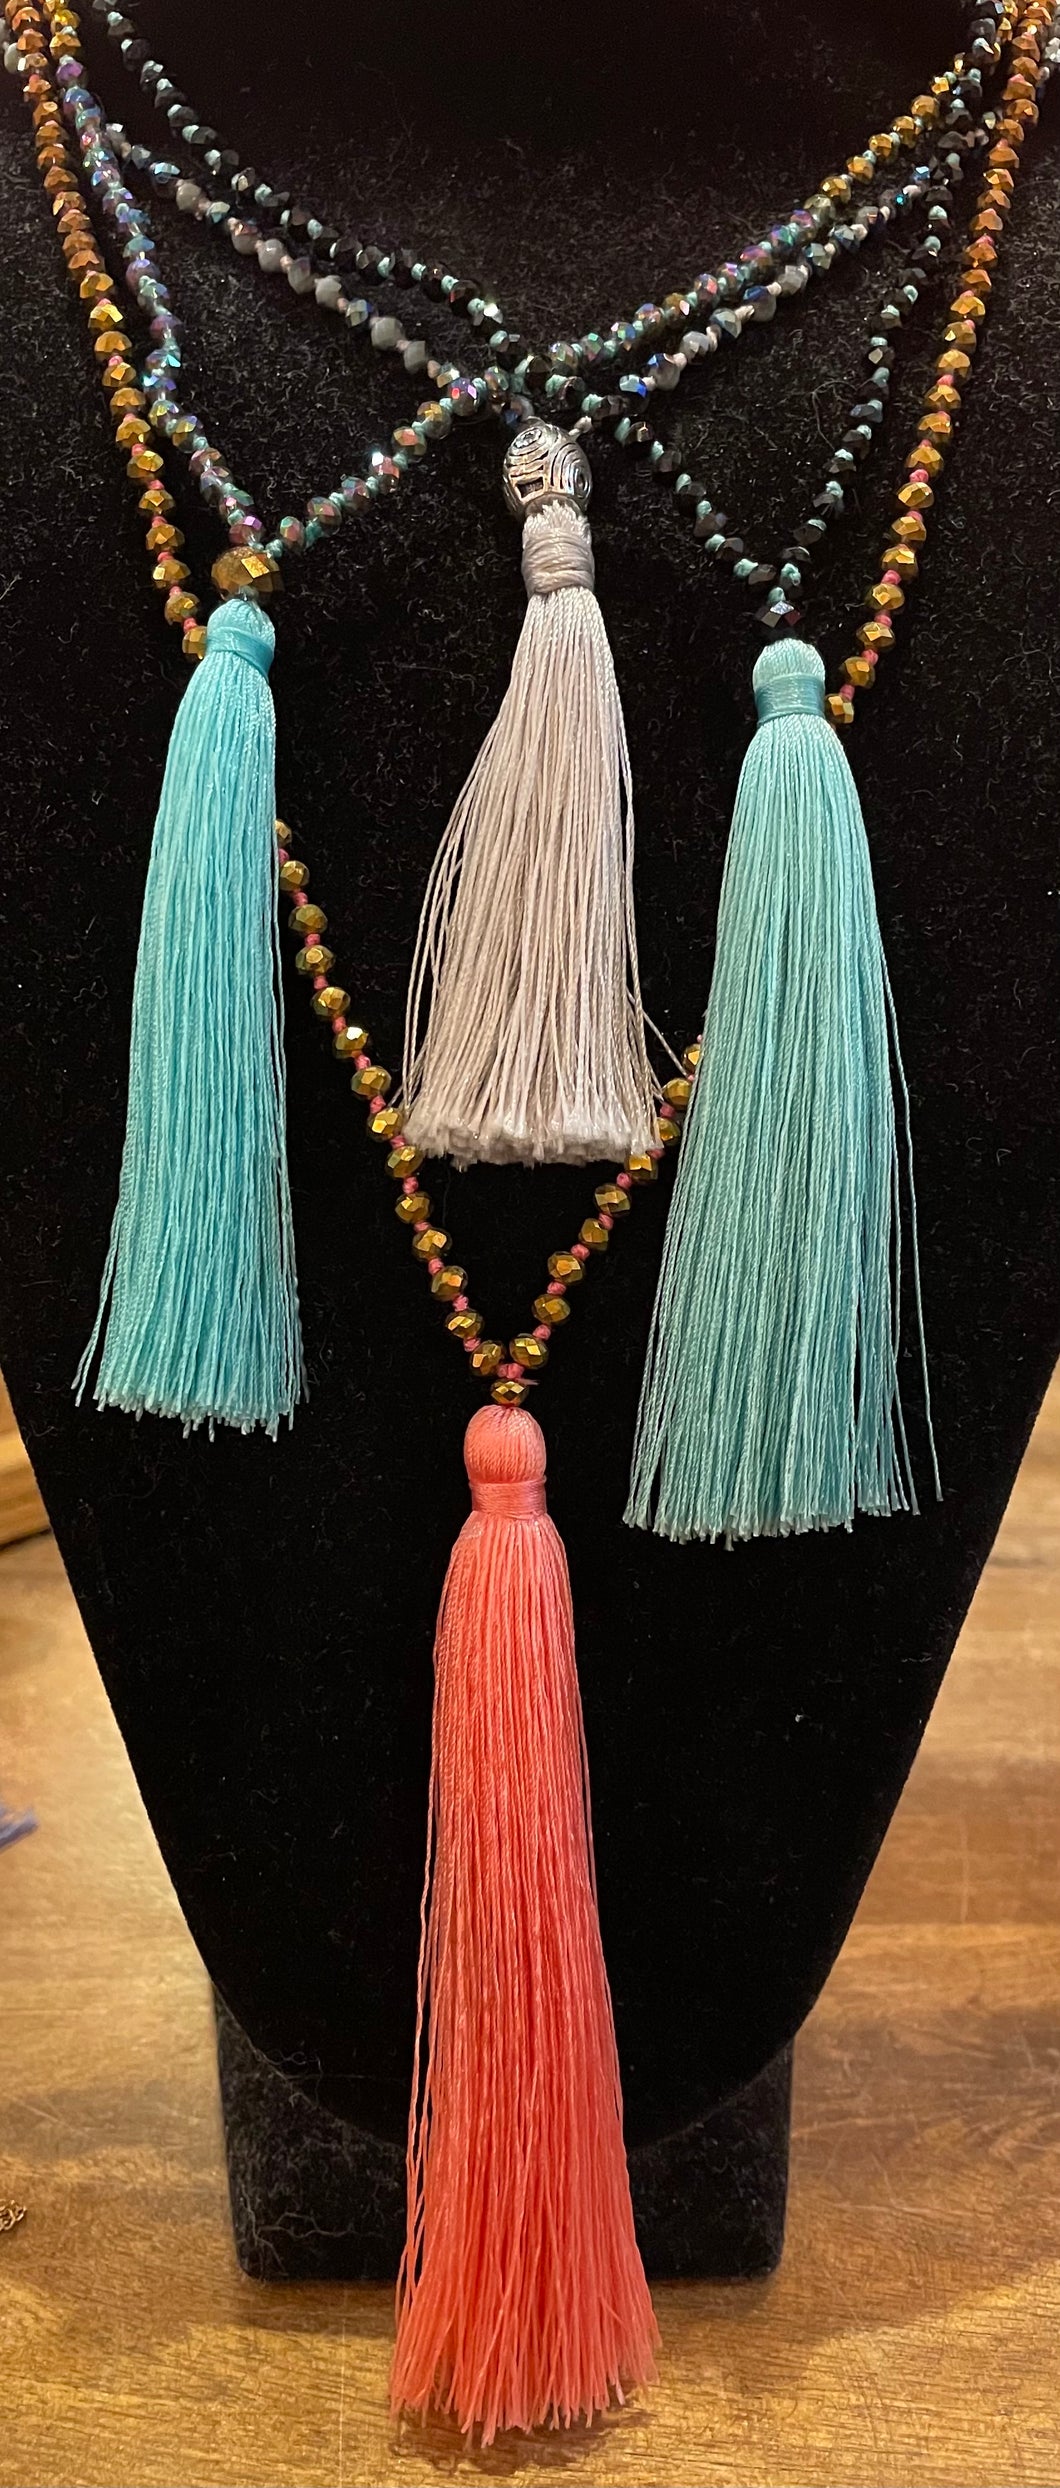 Small Facet Beads and Tassel Necklace